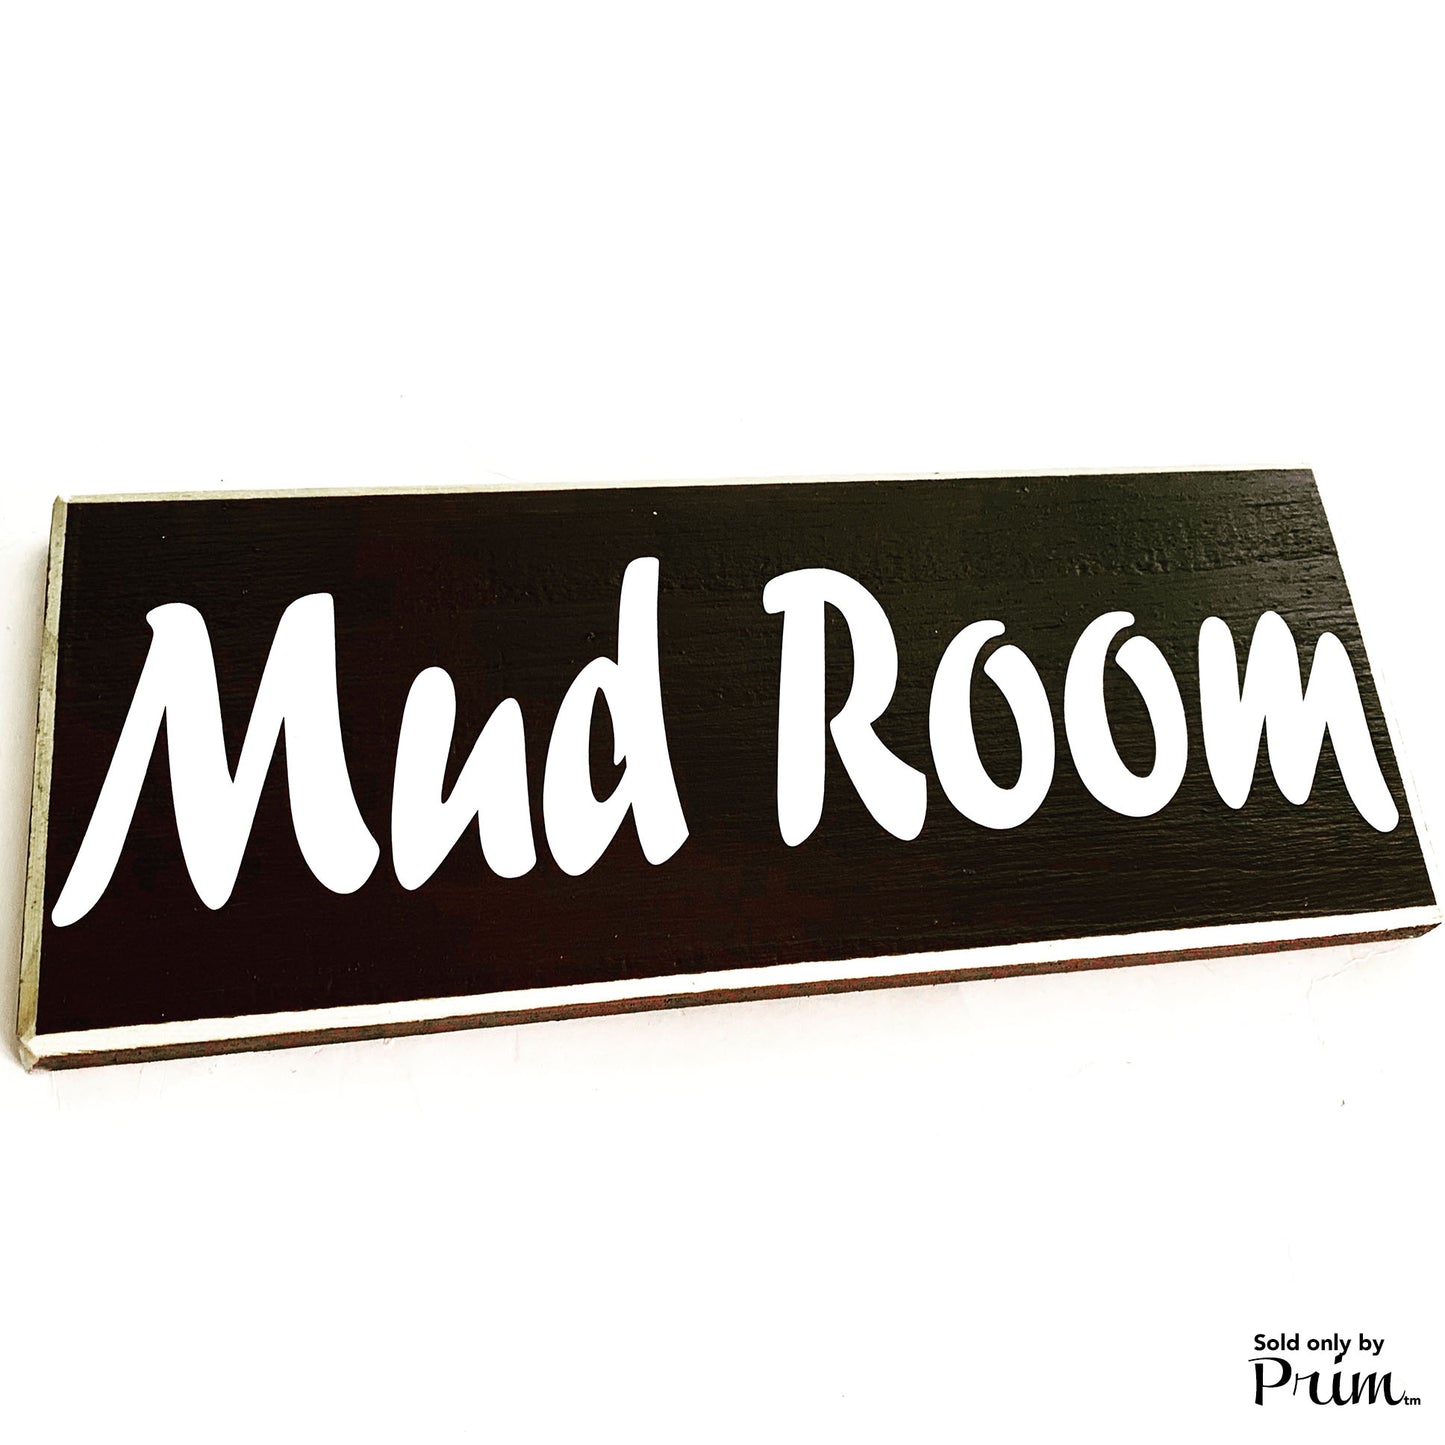 Mud Room Custom Wood Sign 12x4 Entryway Front Foyer Please Remove Your Shoes Coat Rack Storage Room Laundry